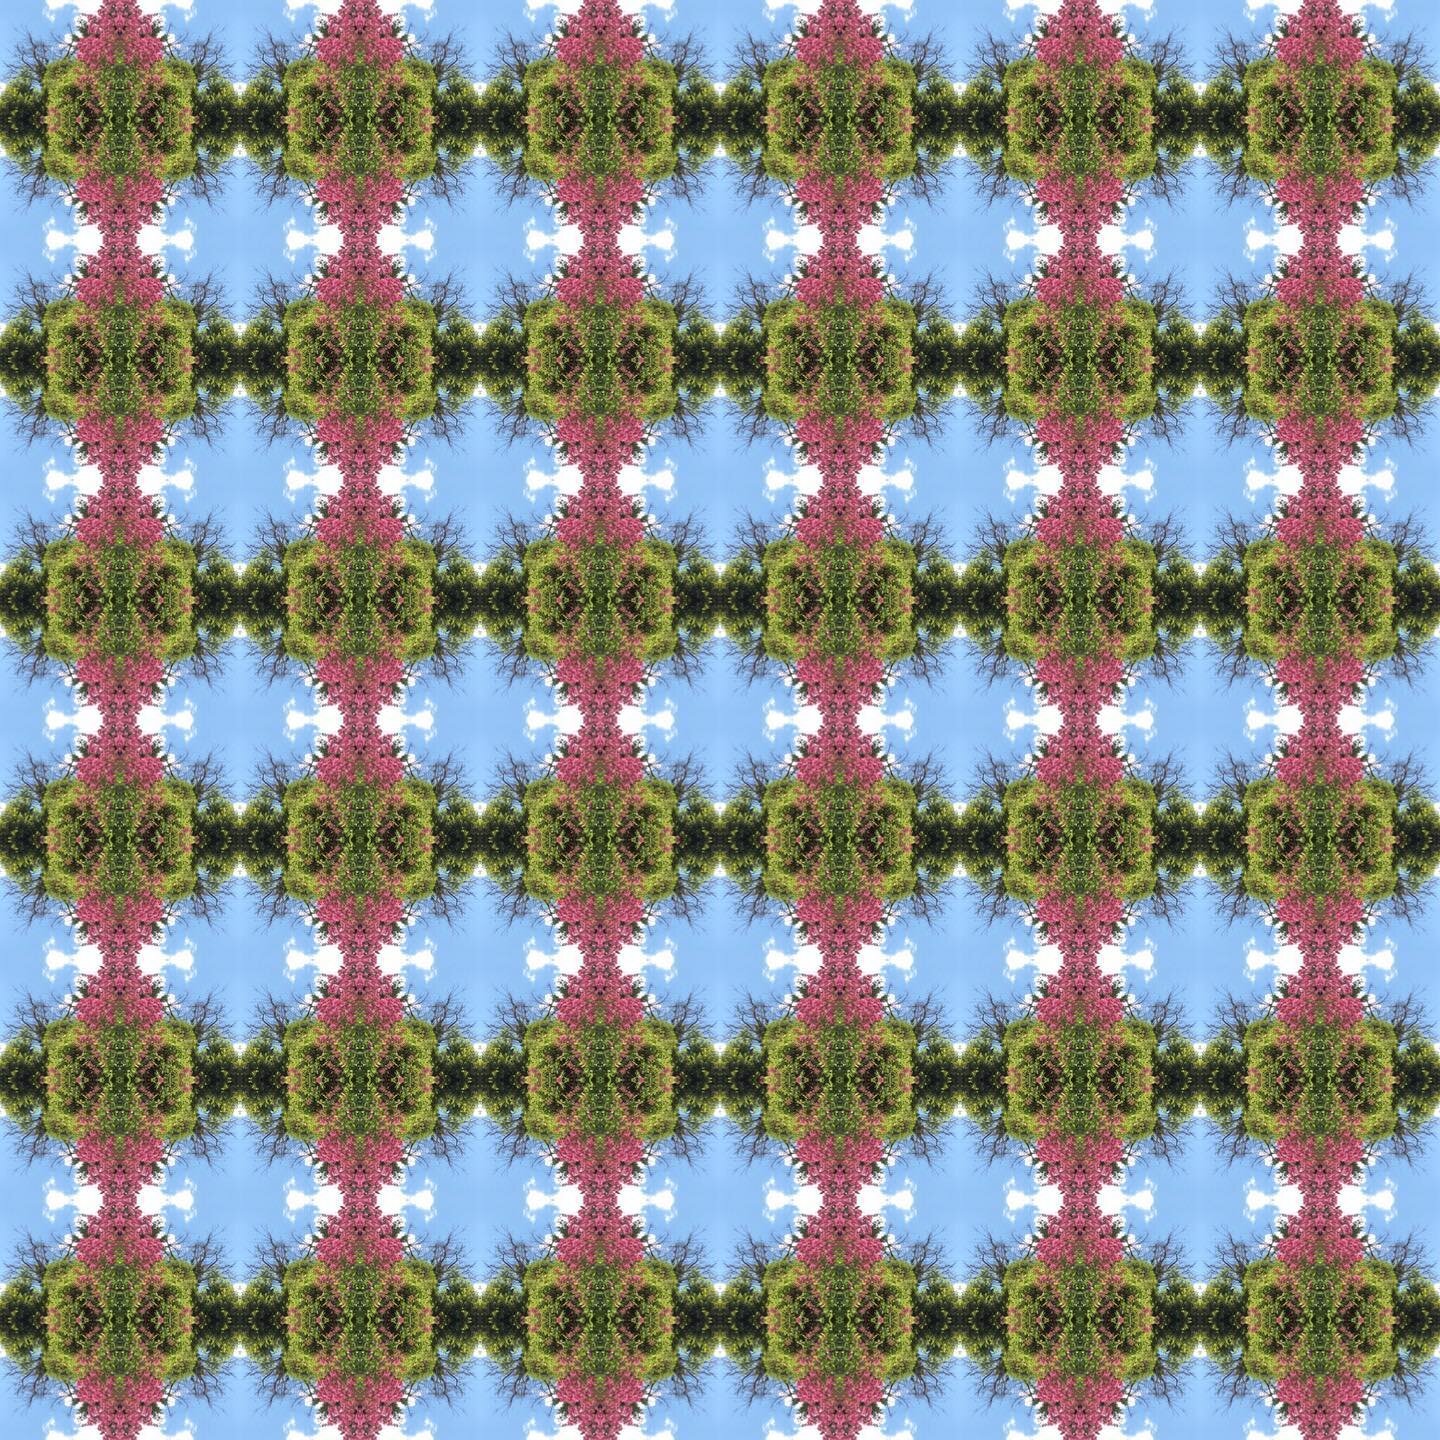 I haven&rsquo;t shared any of these for a while but I found myself experimenting with a few patterns today. #repeatpattern #digitalart #layoutapp #flowers #pink #blue #green #cheddargorge